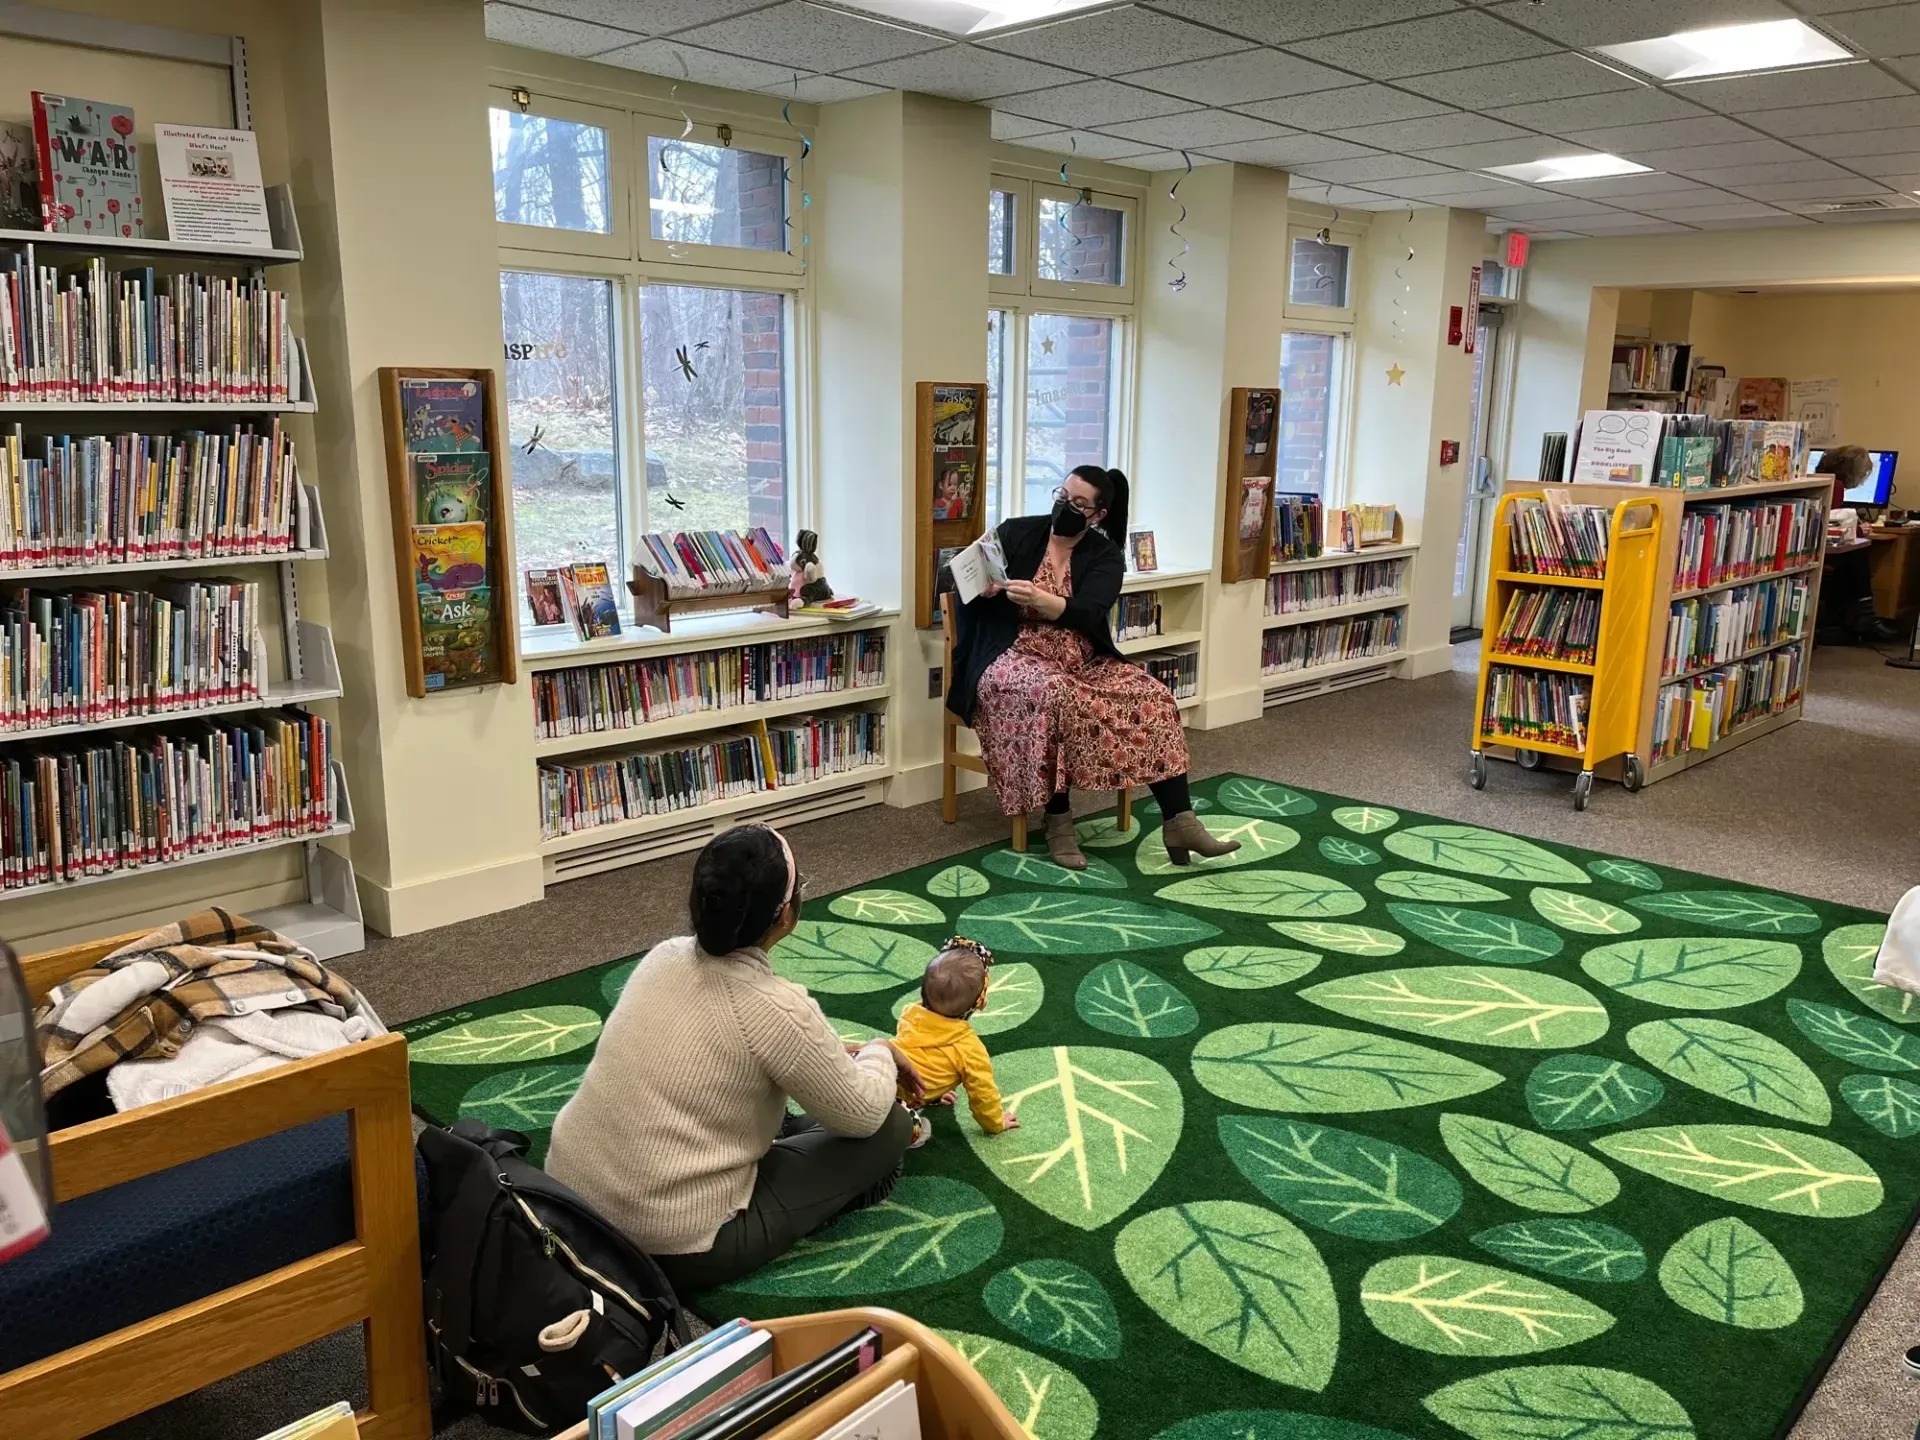 Children's librarian reading a book to a storytime group